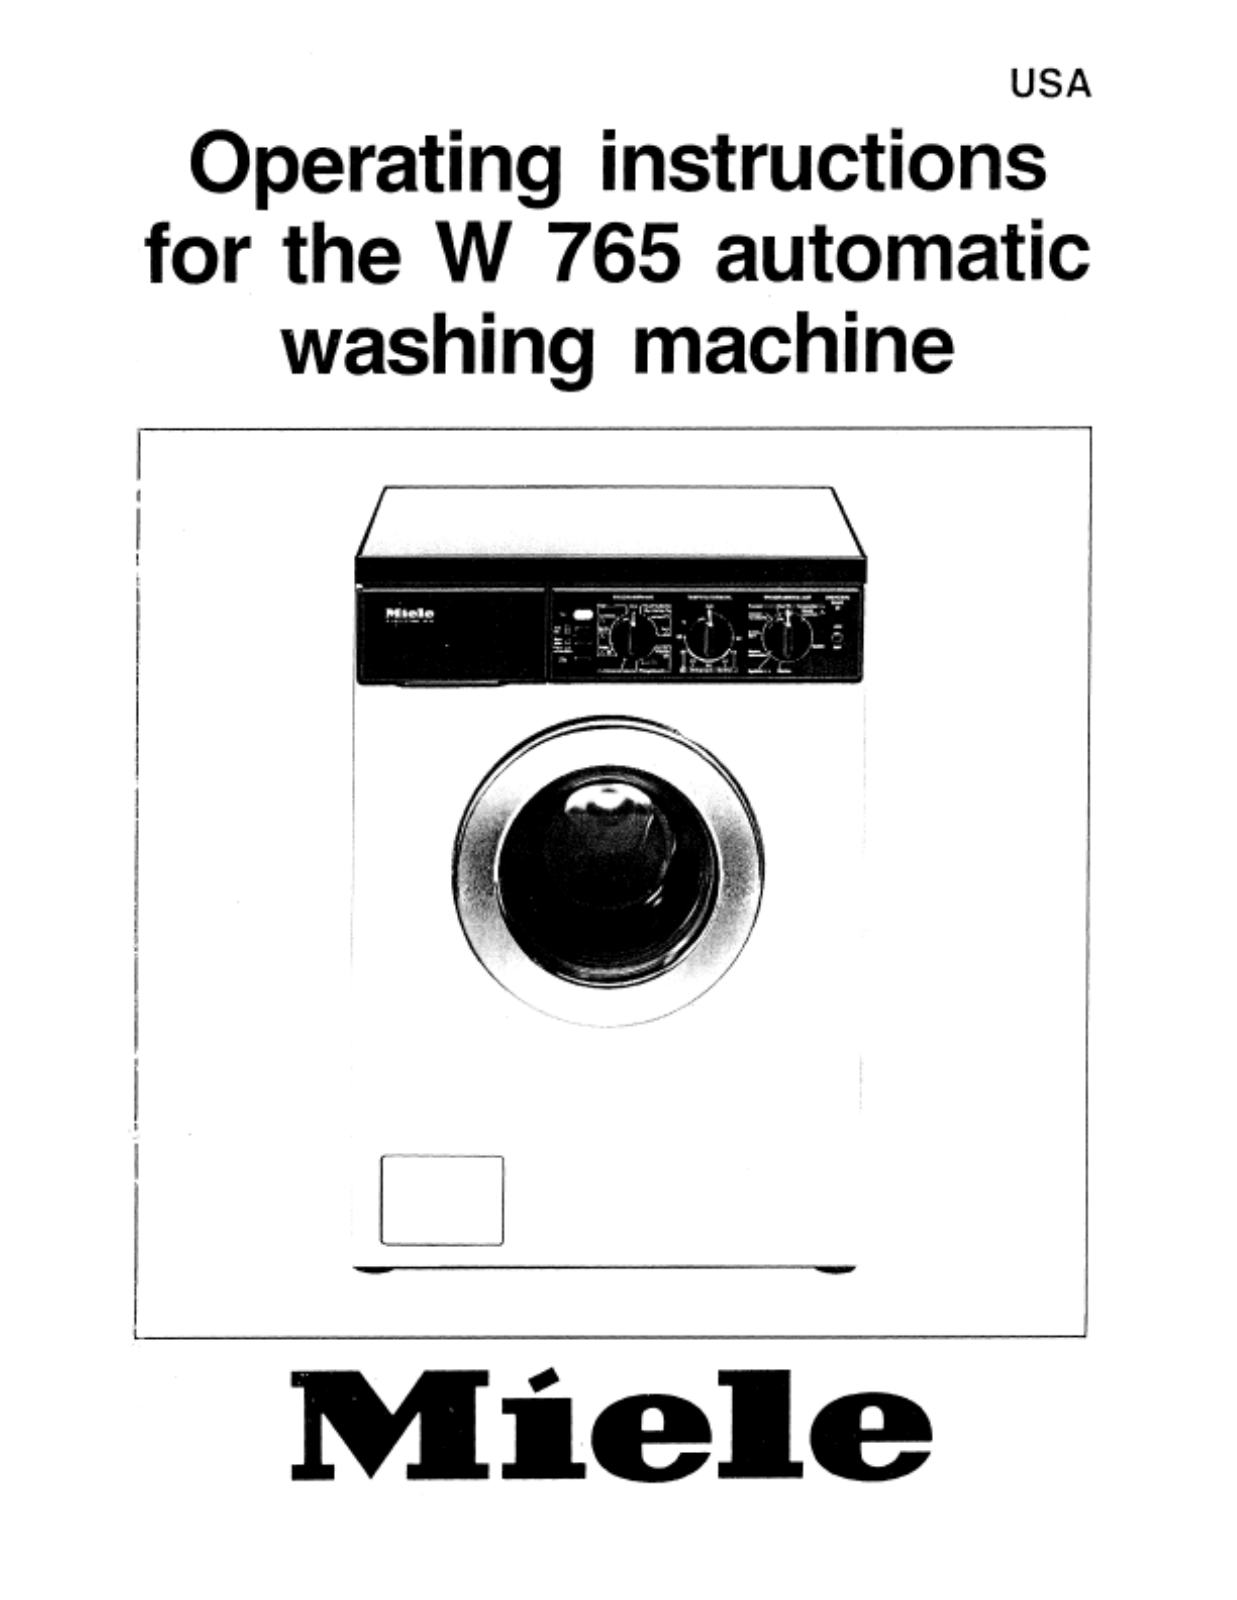 Miele W765 Operating instructions